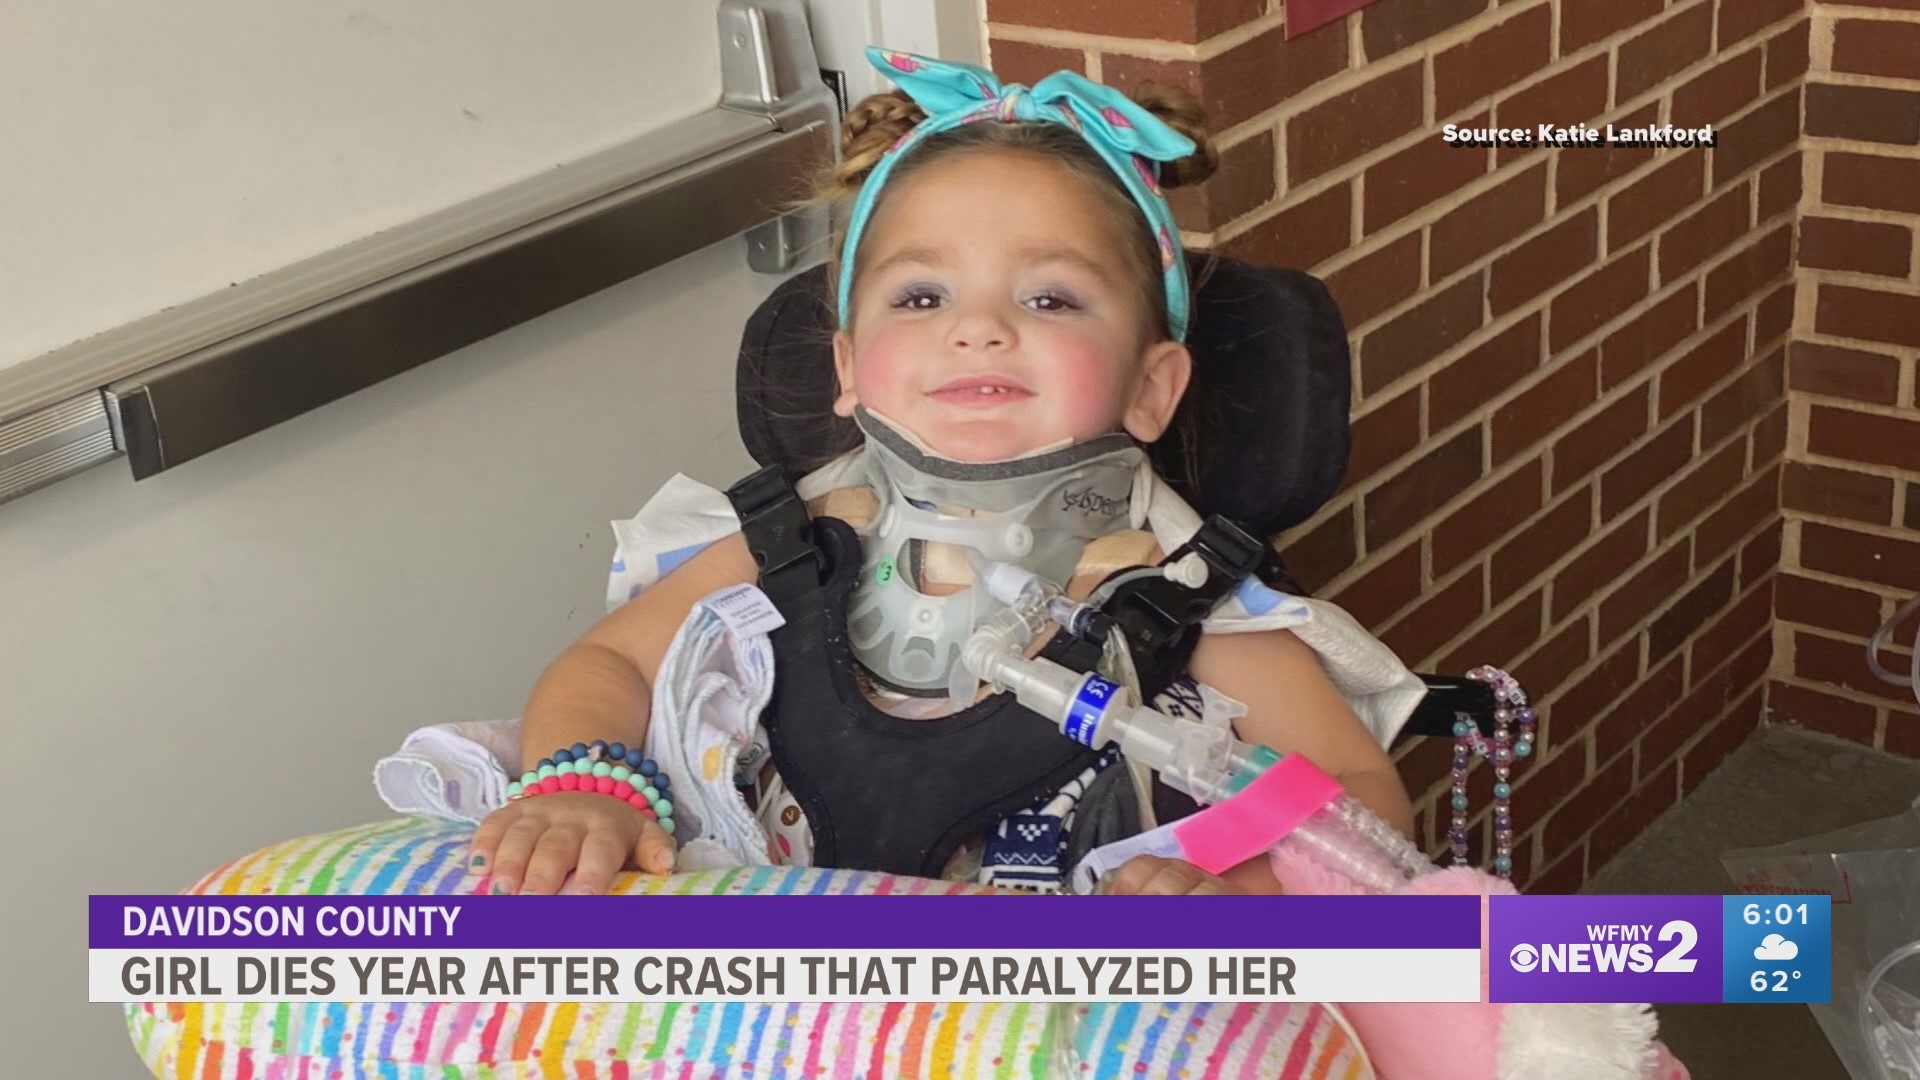 It is unclear if Gracie Lankford died from injuries from the crash.